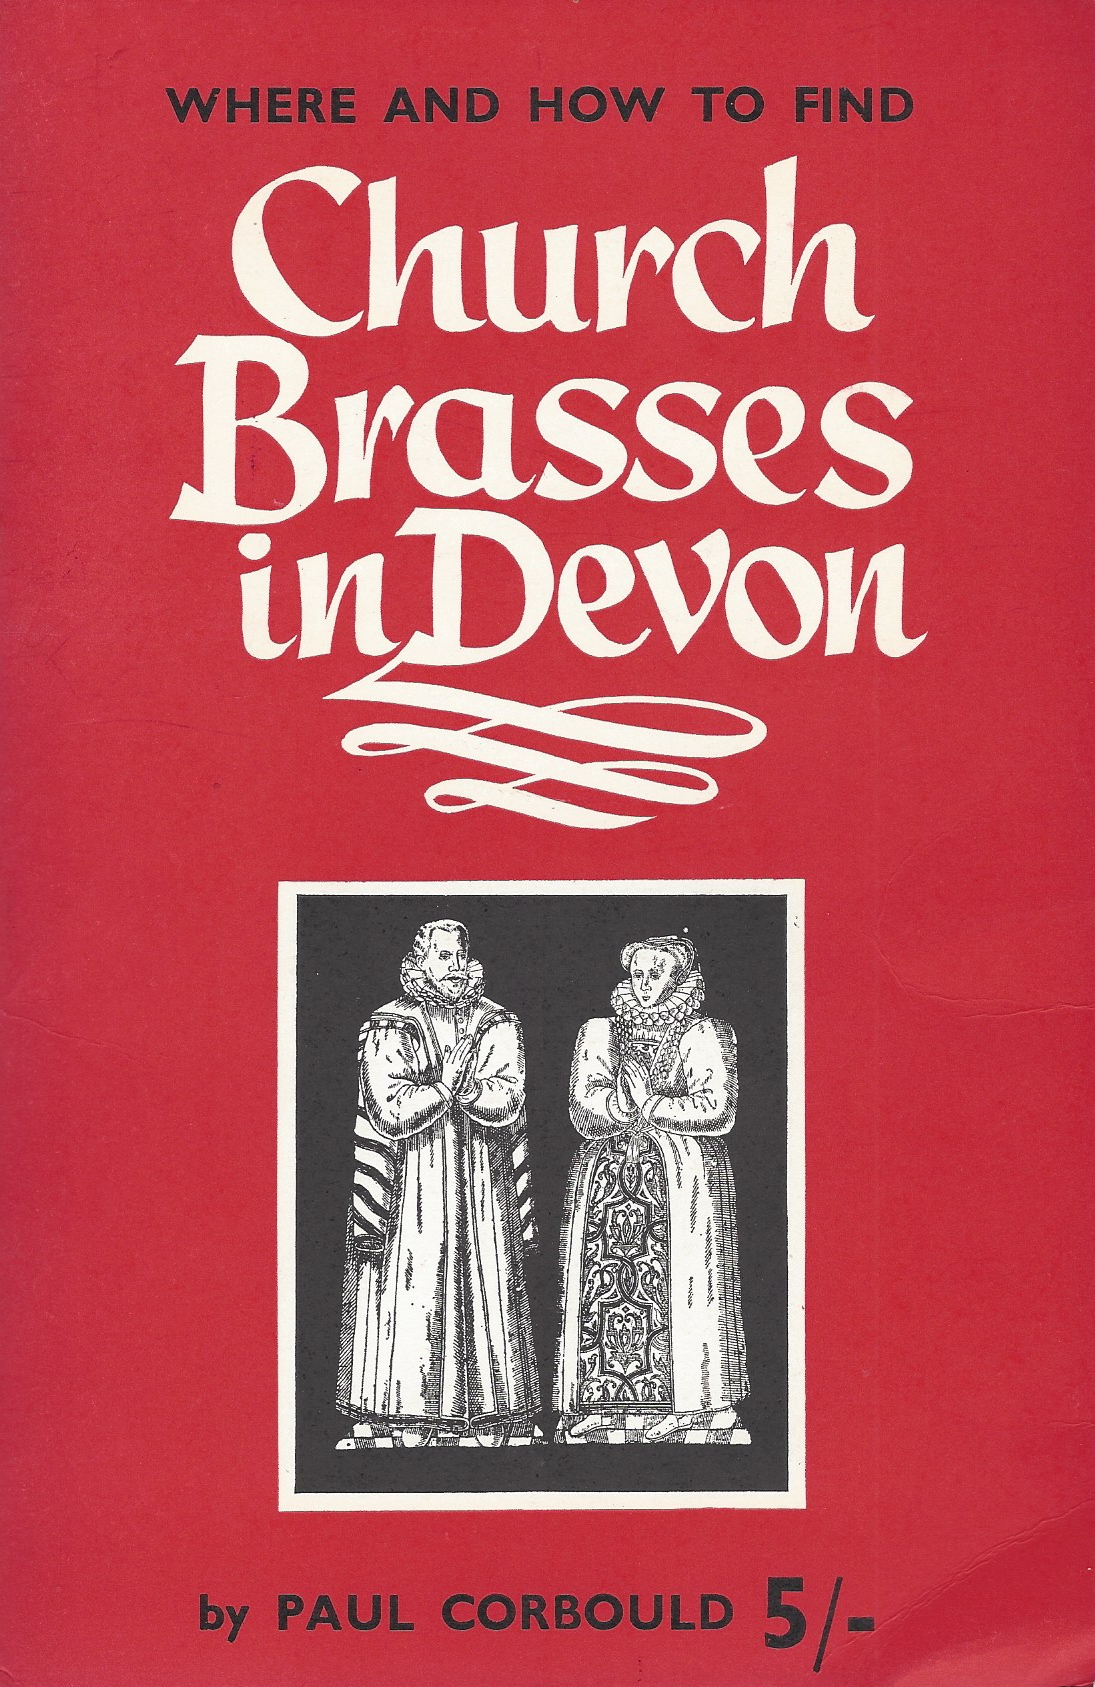 CORBOULD PAUL - Where and How to Find Church Brasses in Devon. (1970? )